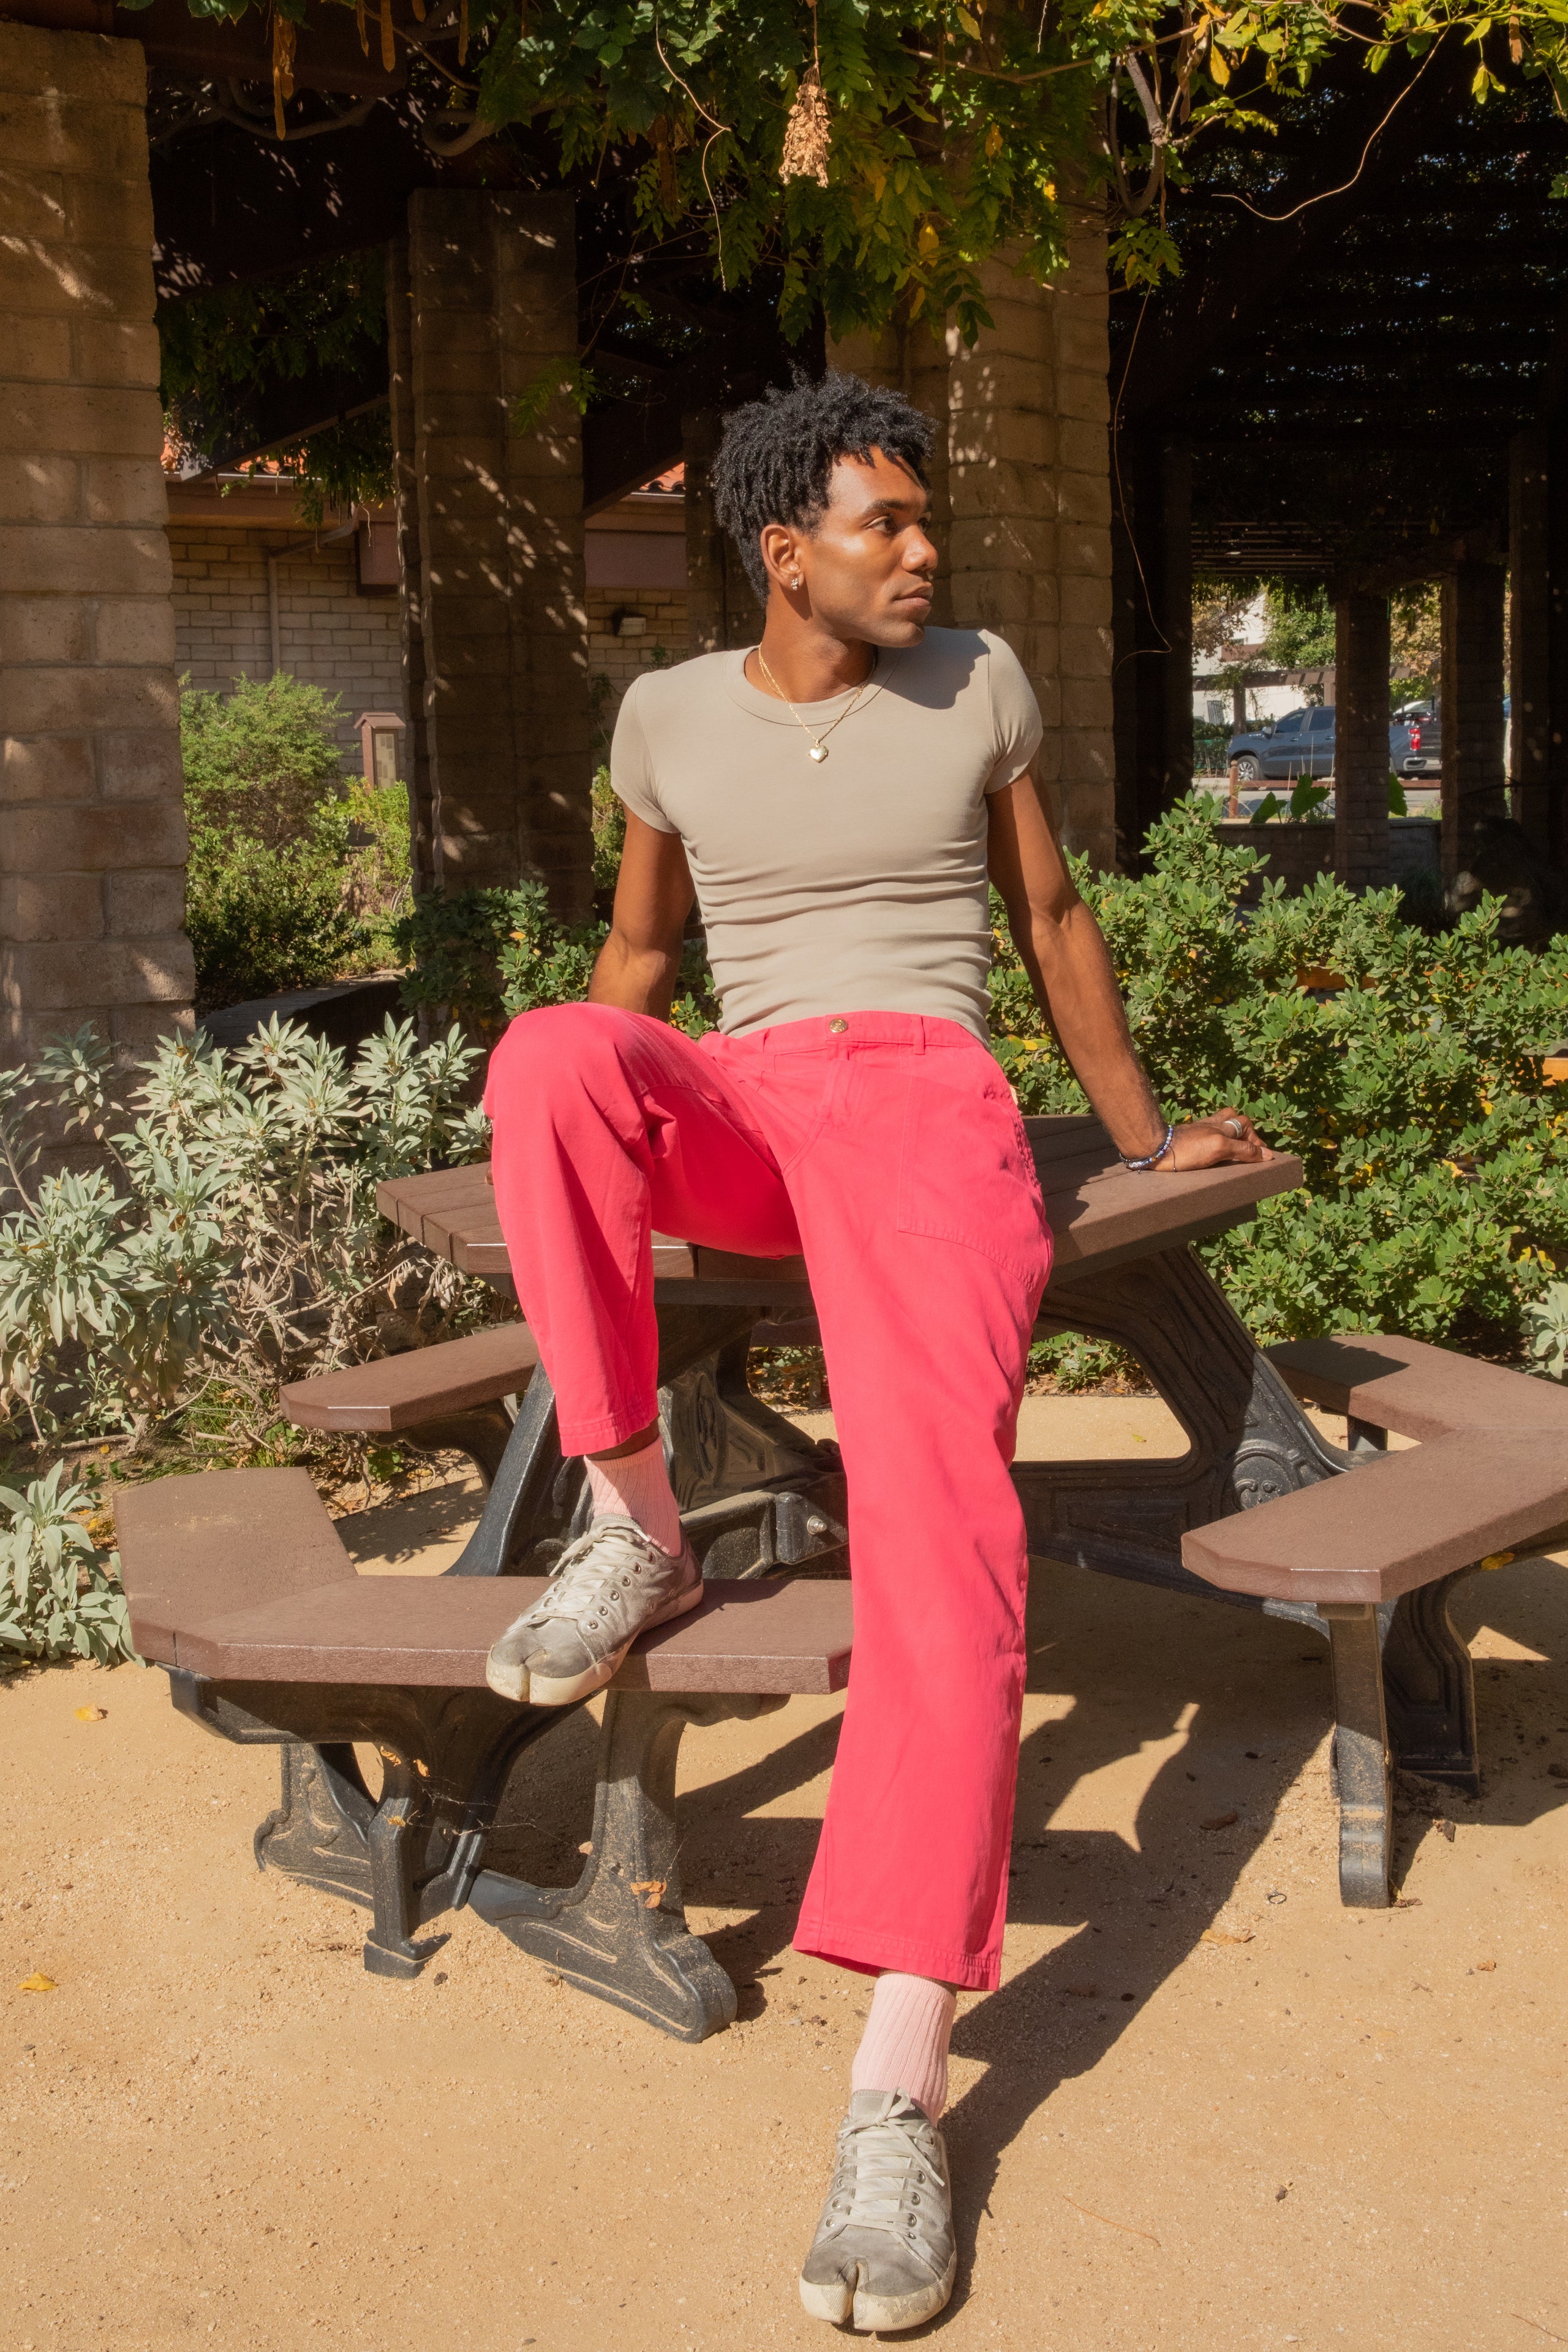 Jerrod wearing Work Pants in Hot Pink and Baby Tee in Khaki Grey